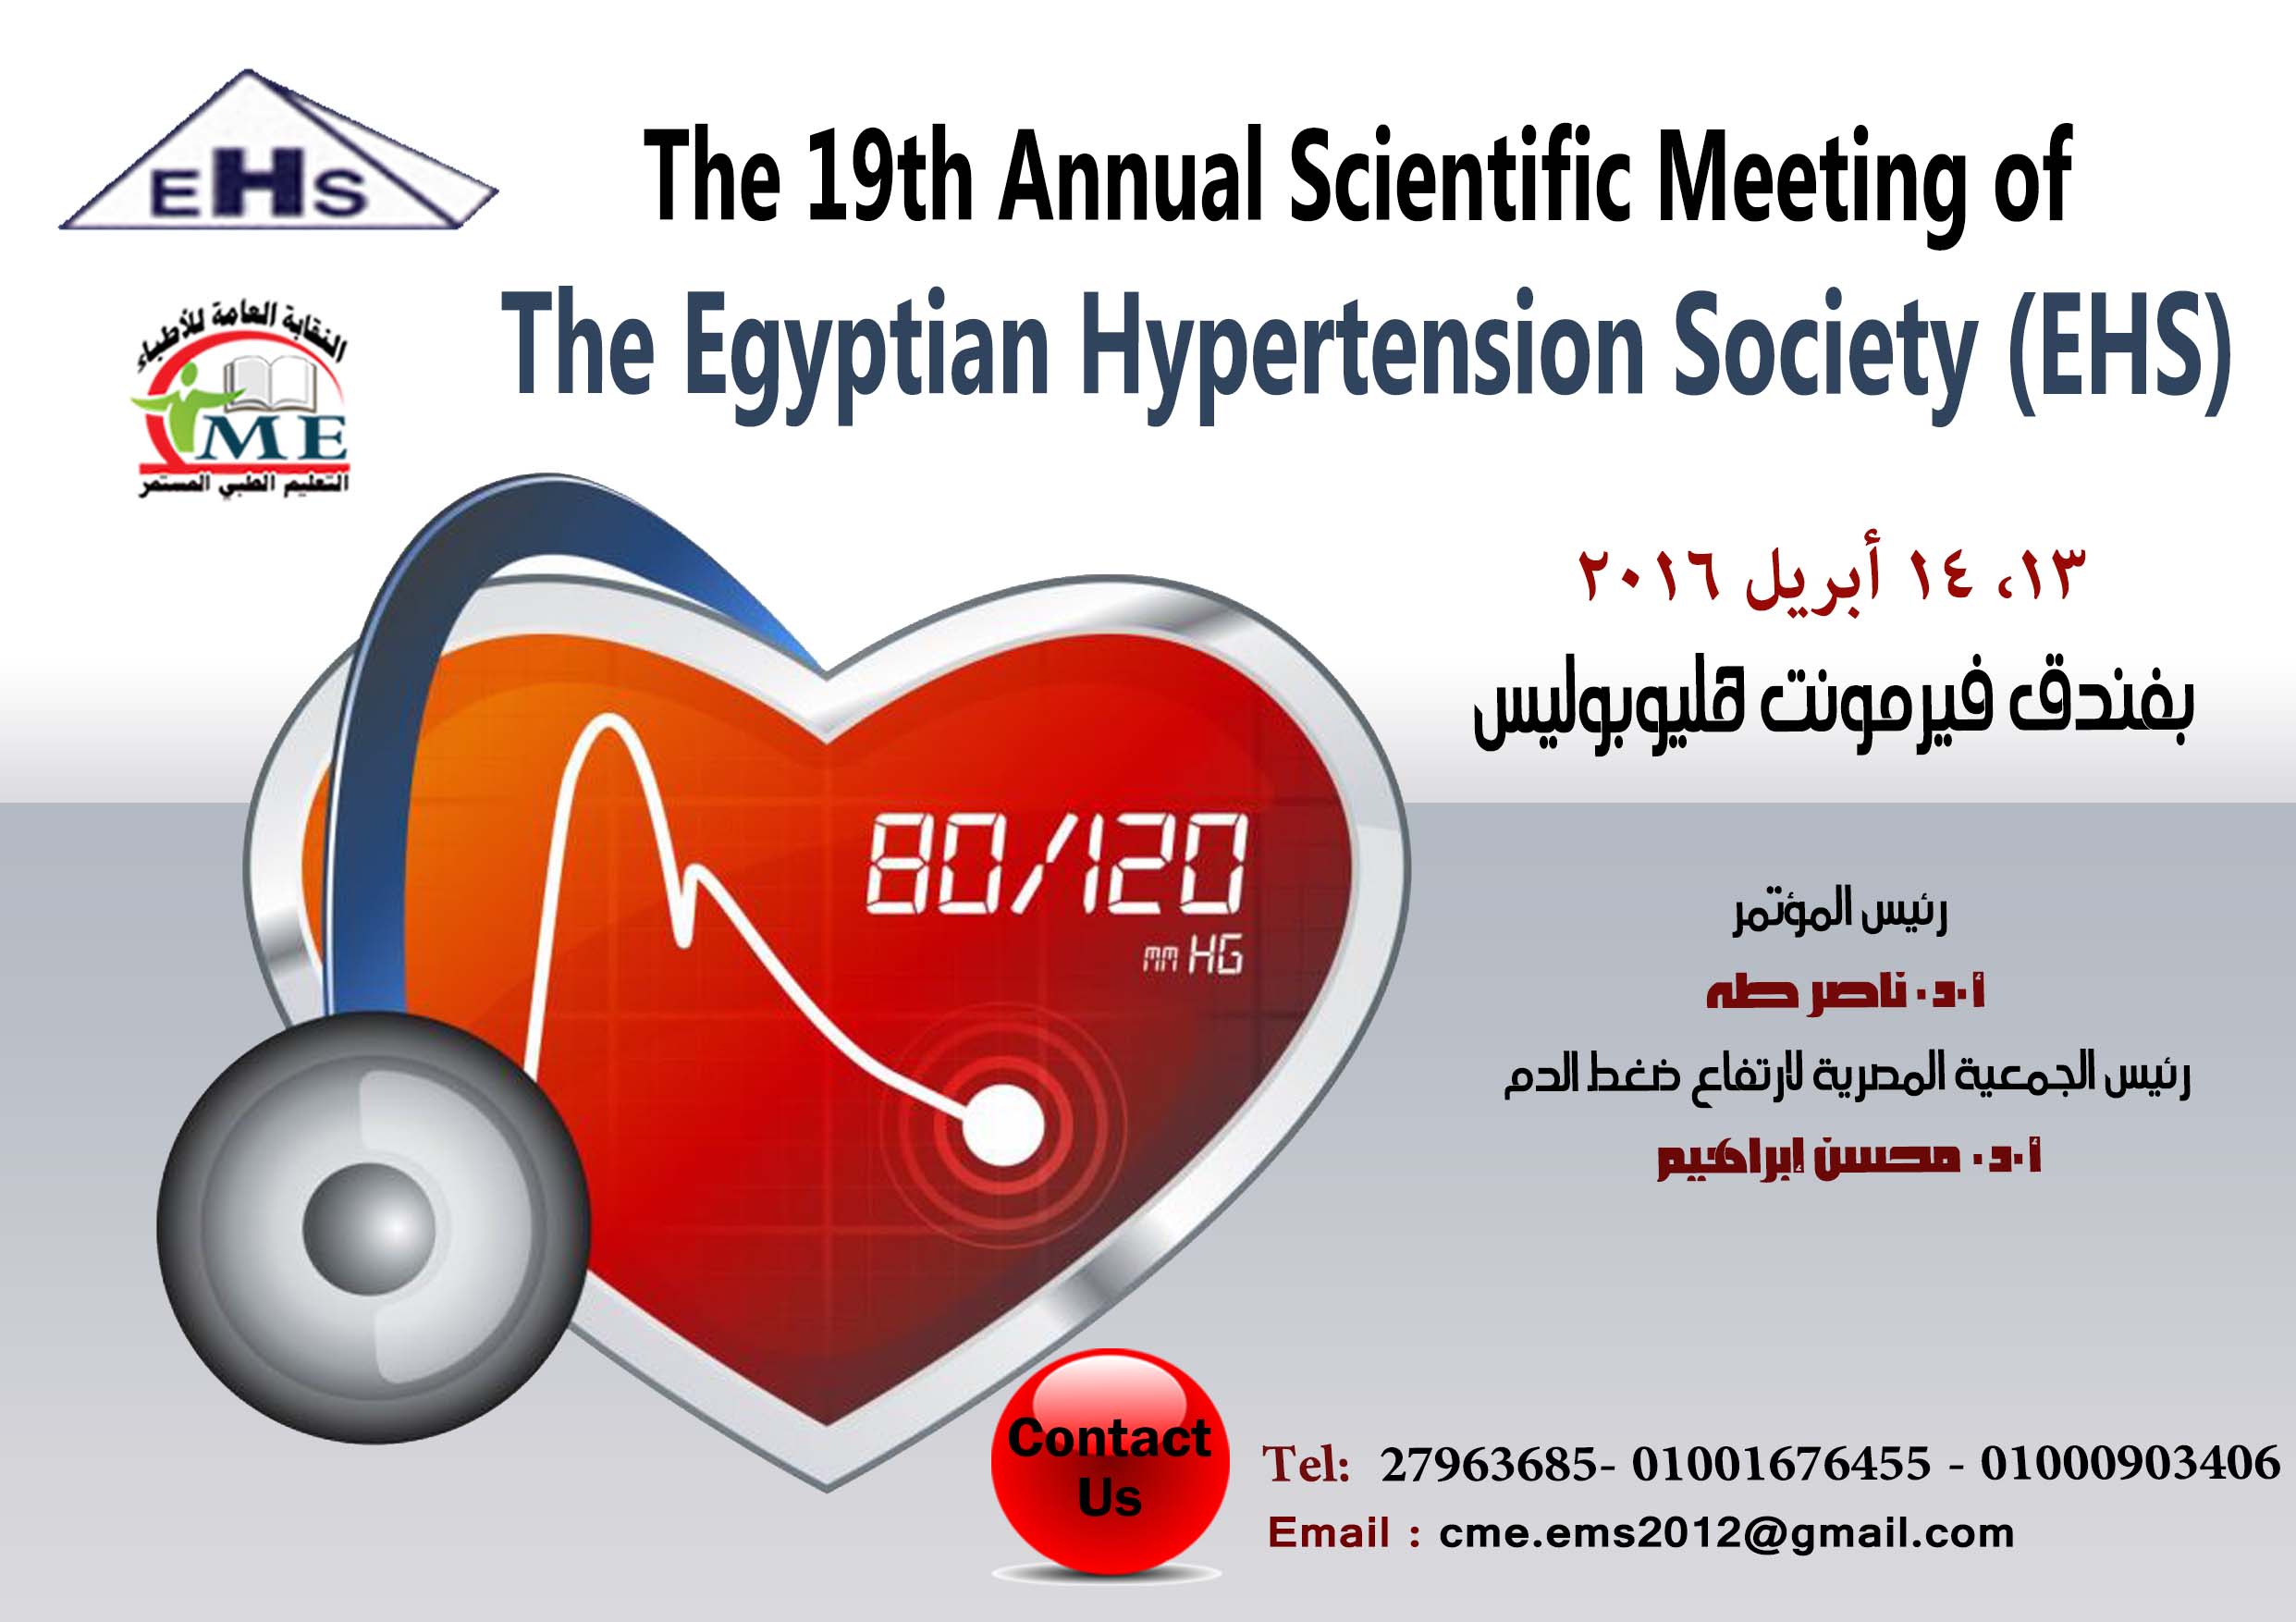 The 19th Annual Scientific Meeting of The Egyptian Hypertension Society (EHS)